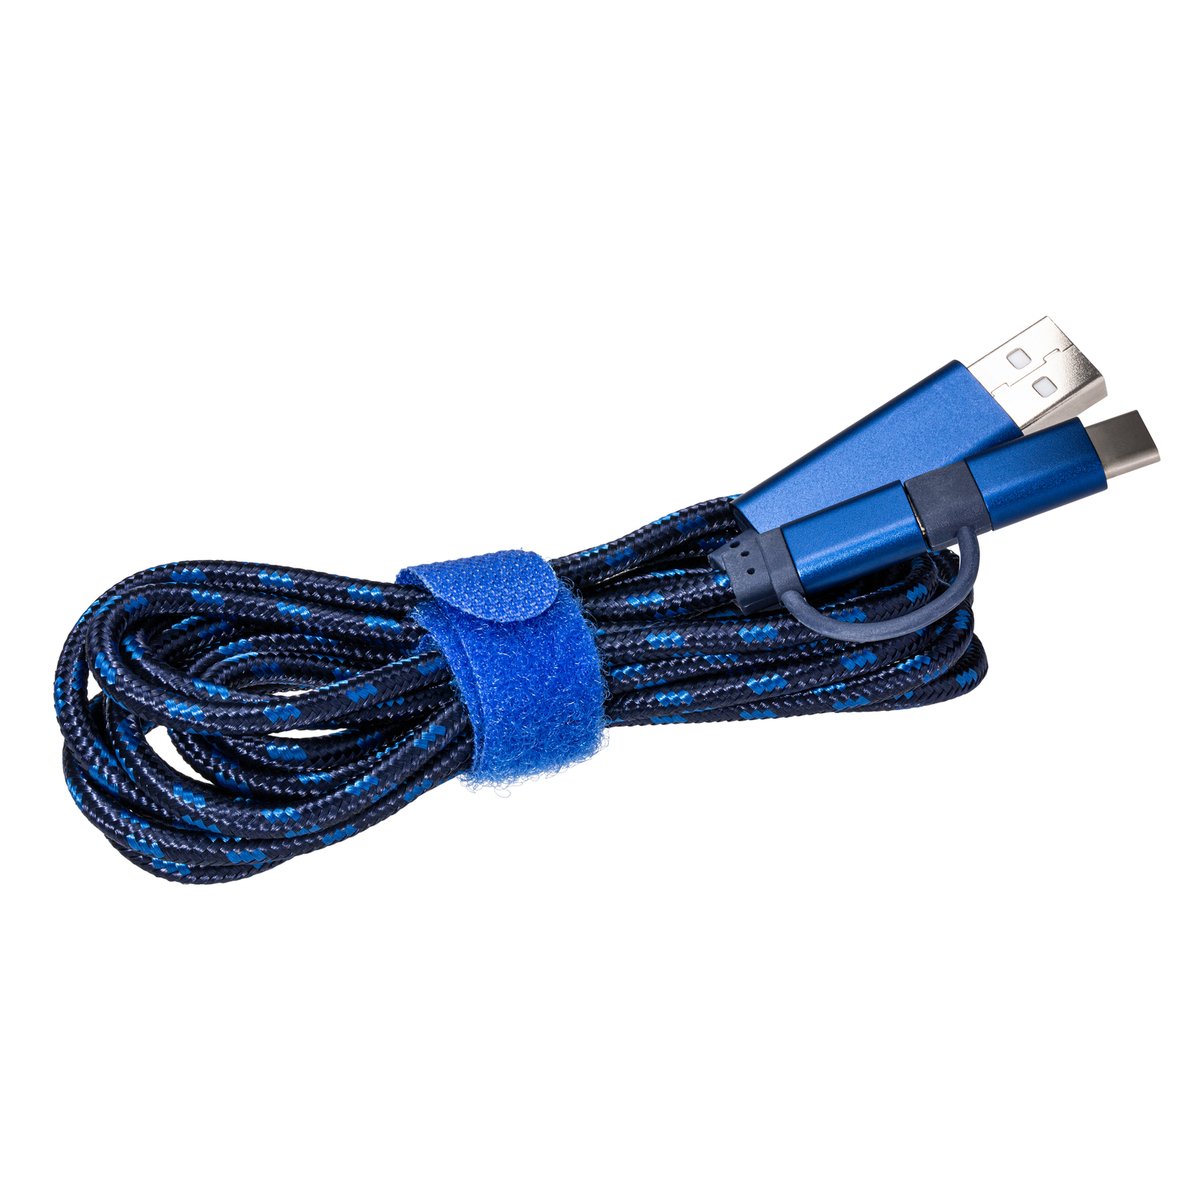 3-in-1 Charging Cable REEVES-ASSISI blue